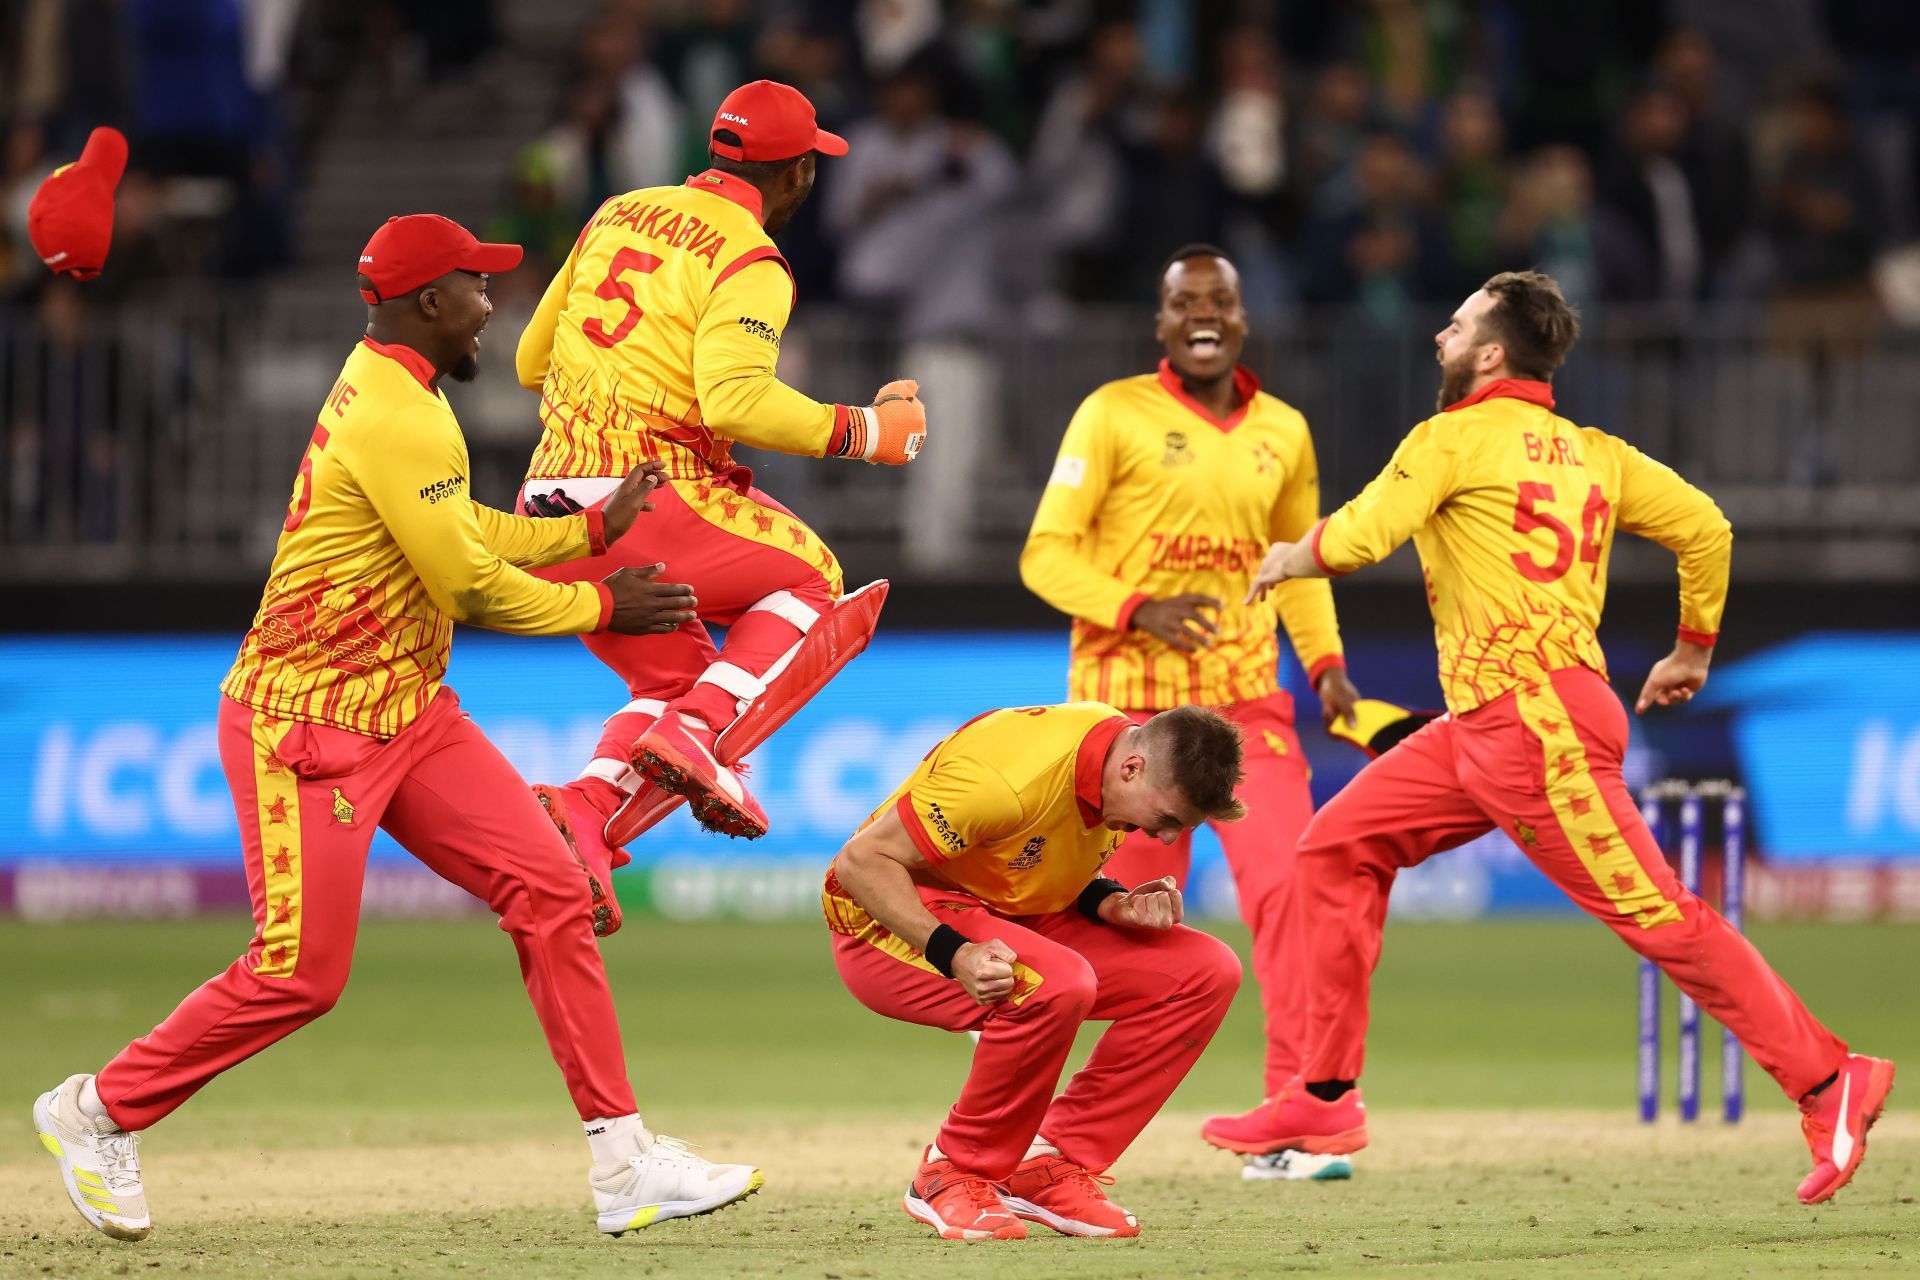 Zimbabwe came through the qualifiers to make it to the Super 12 stage.